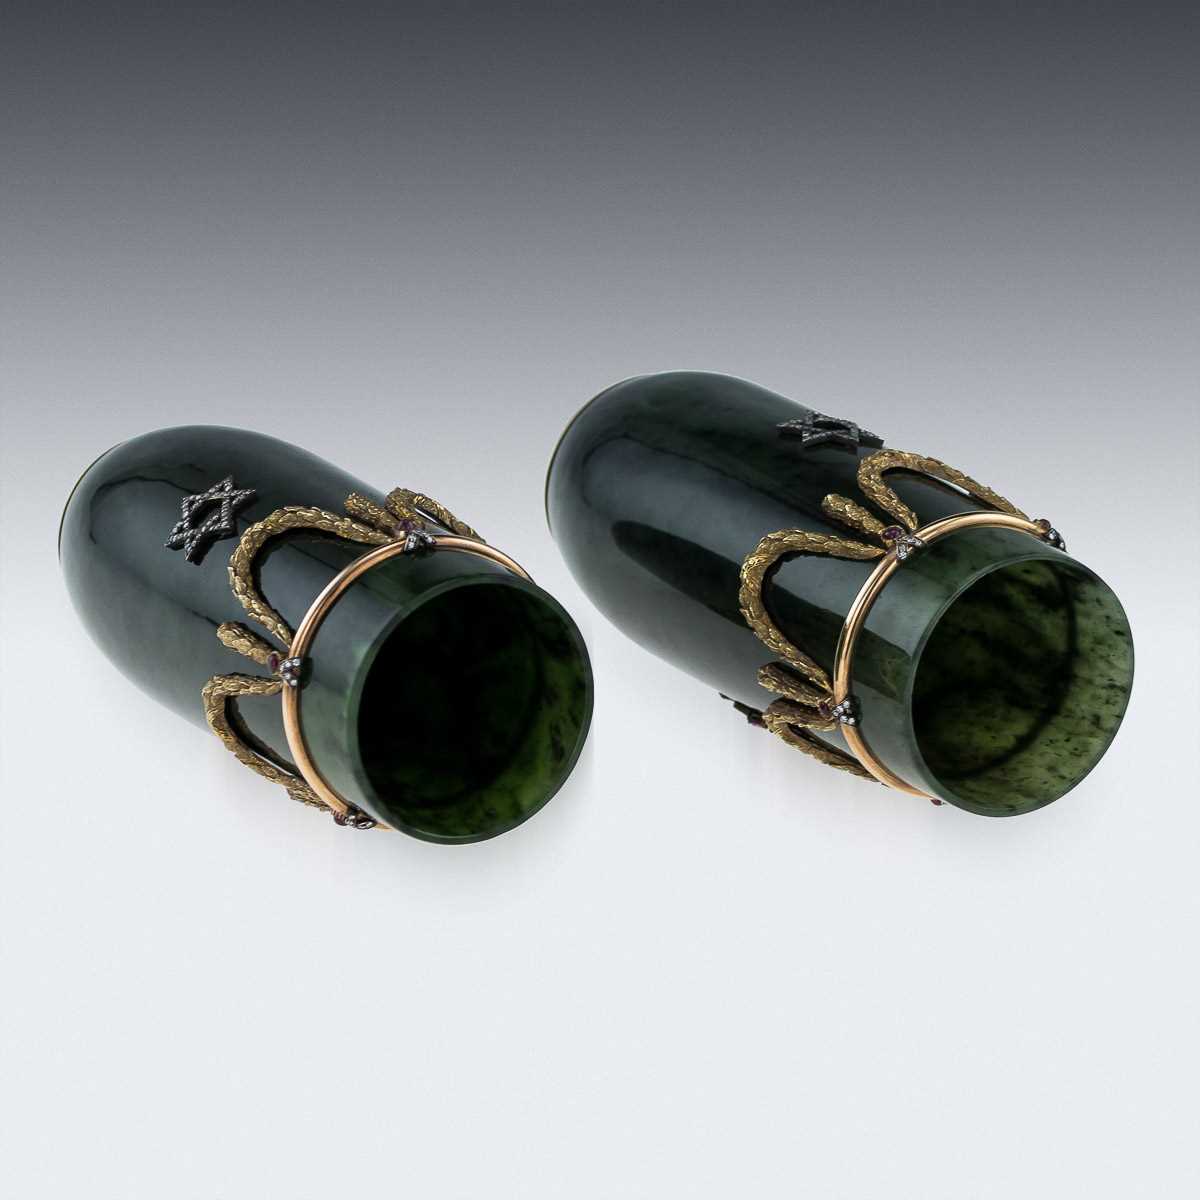 A PAIR 14K GOLD, NEPHRITE, DIAMOND AND RUBY ENCRUSTED VASES IN THE STYLE OF FABERGE - Image 20 of 28